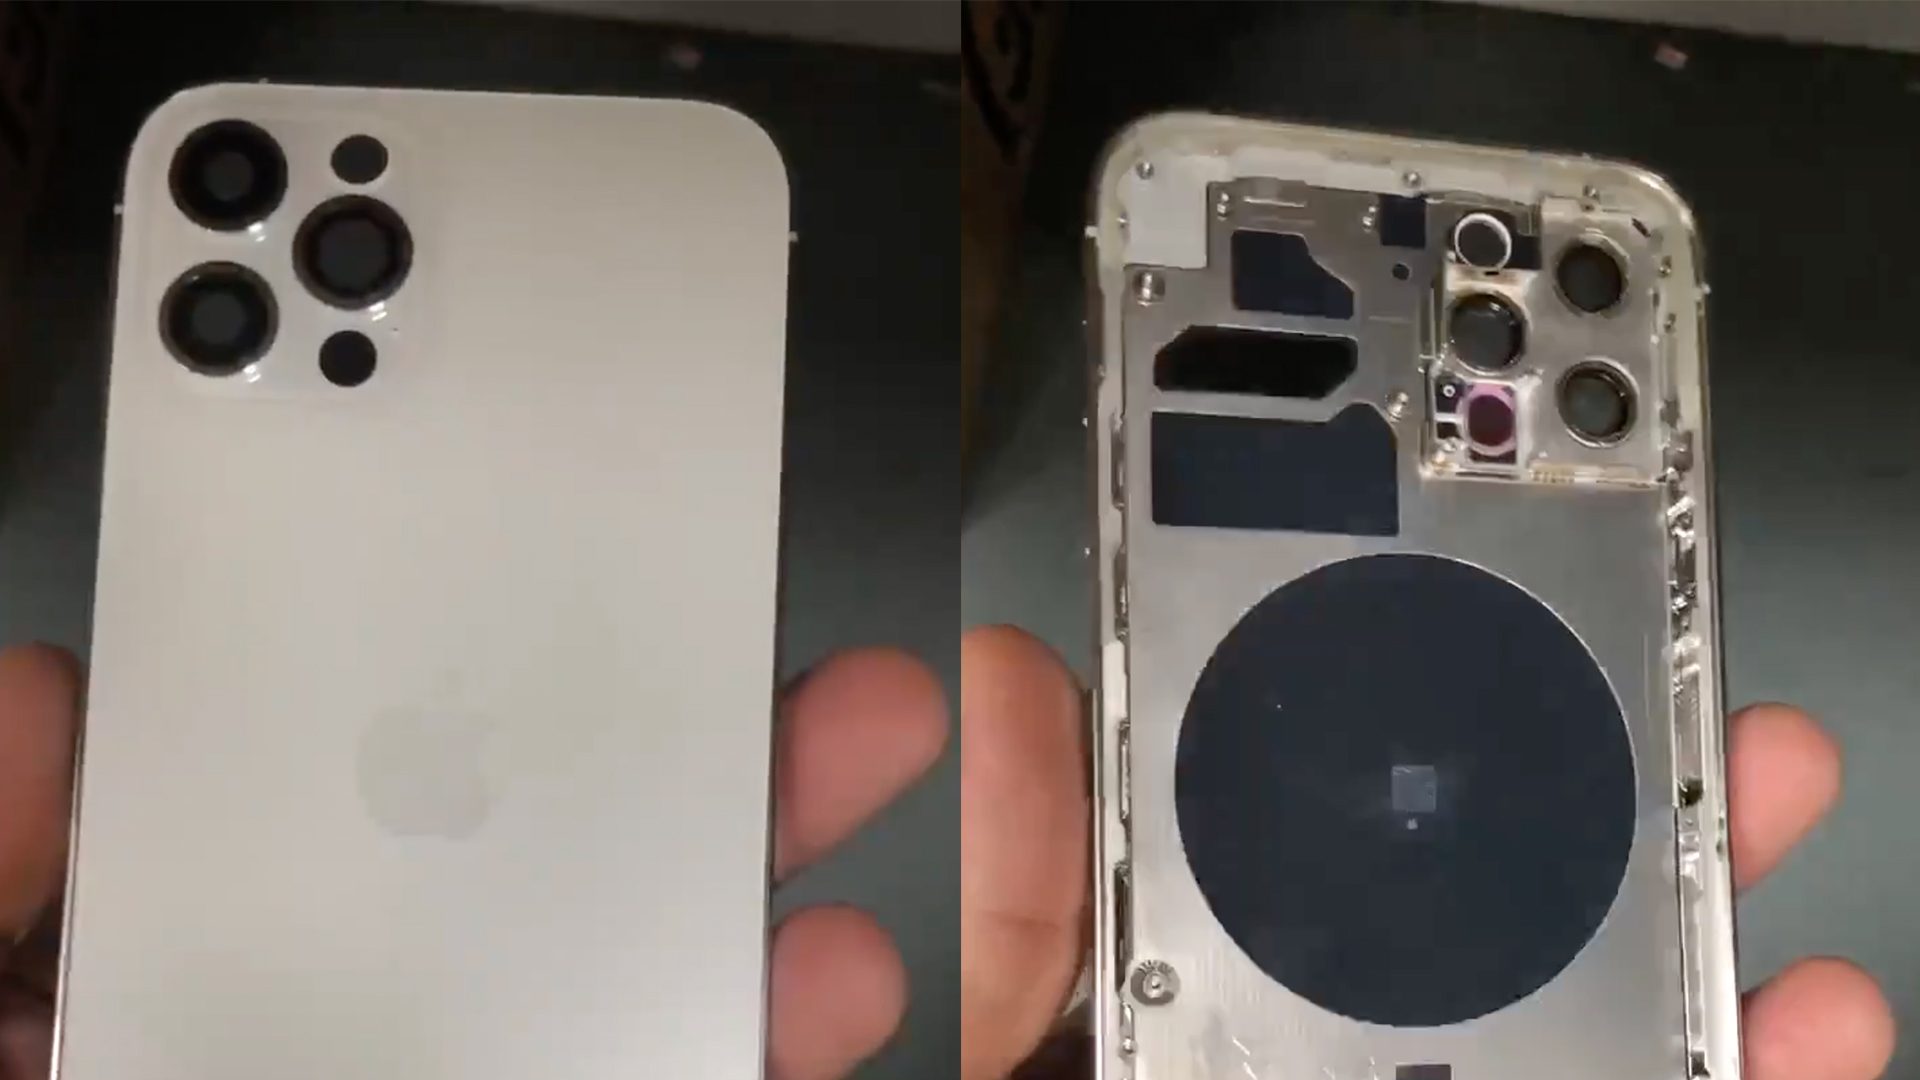 The alleged hands-on video shows the back cover of the 6.1-inch iPhone 12 Pro with LiDAR mode